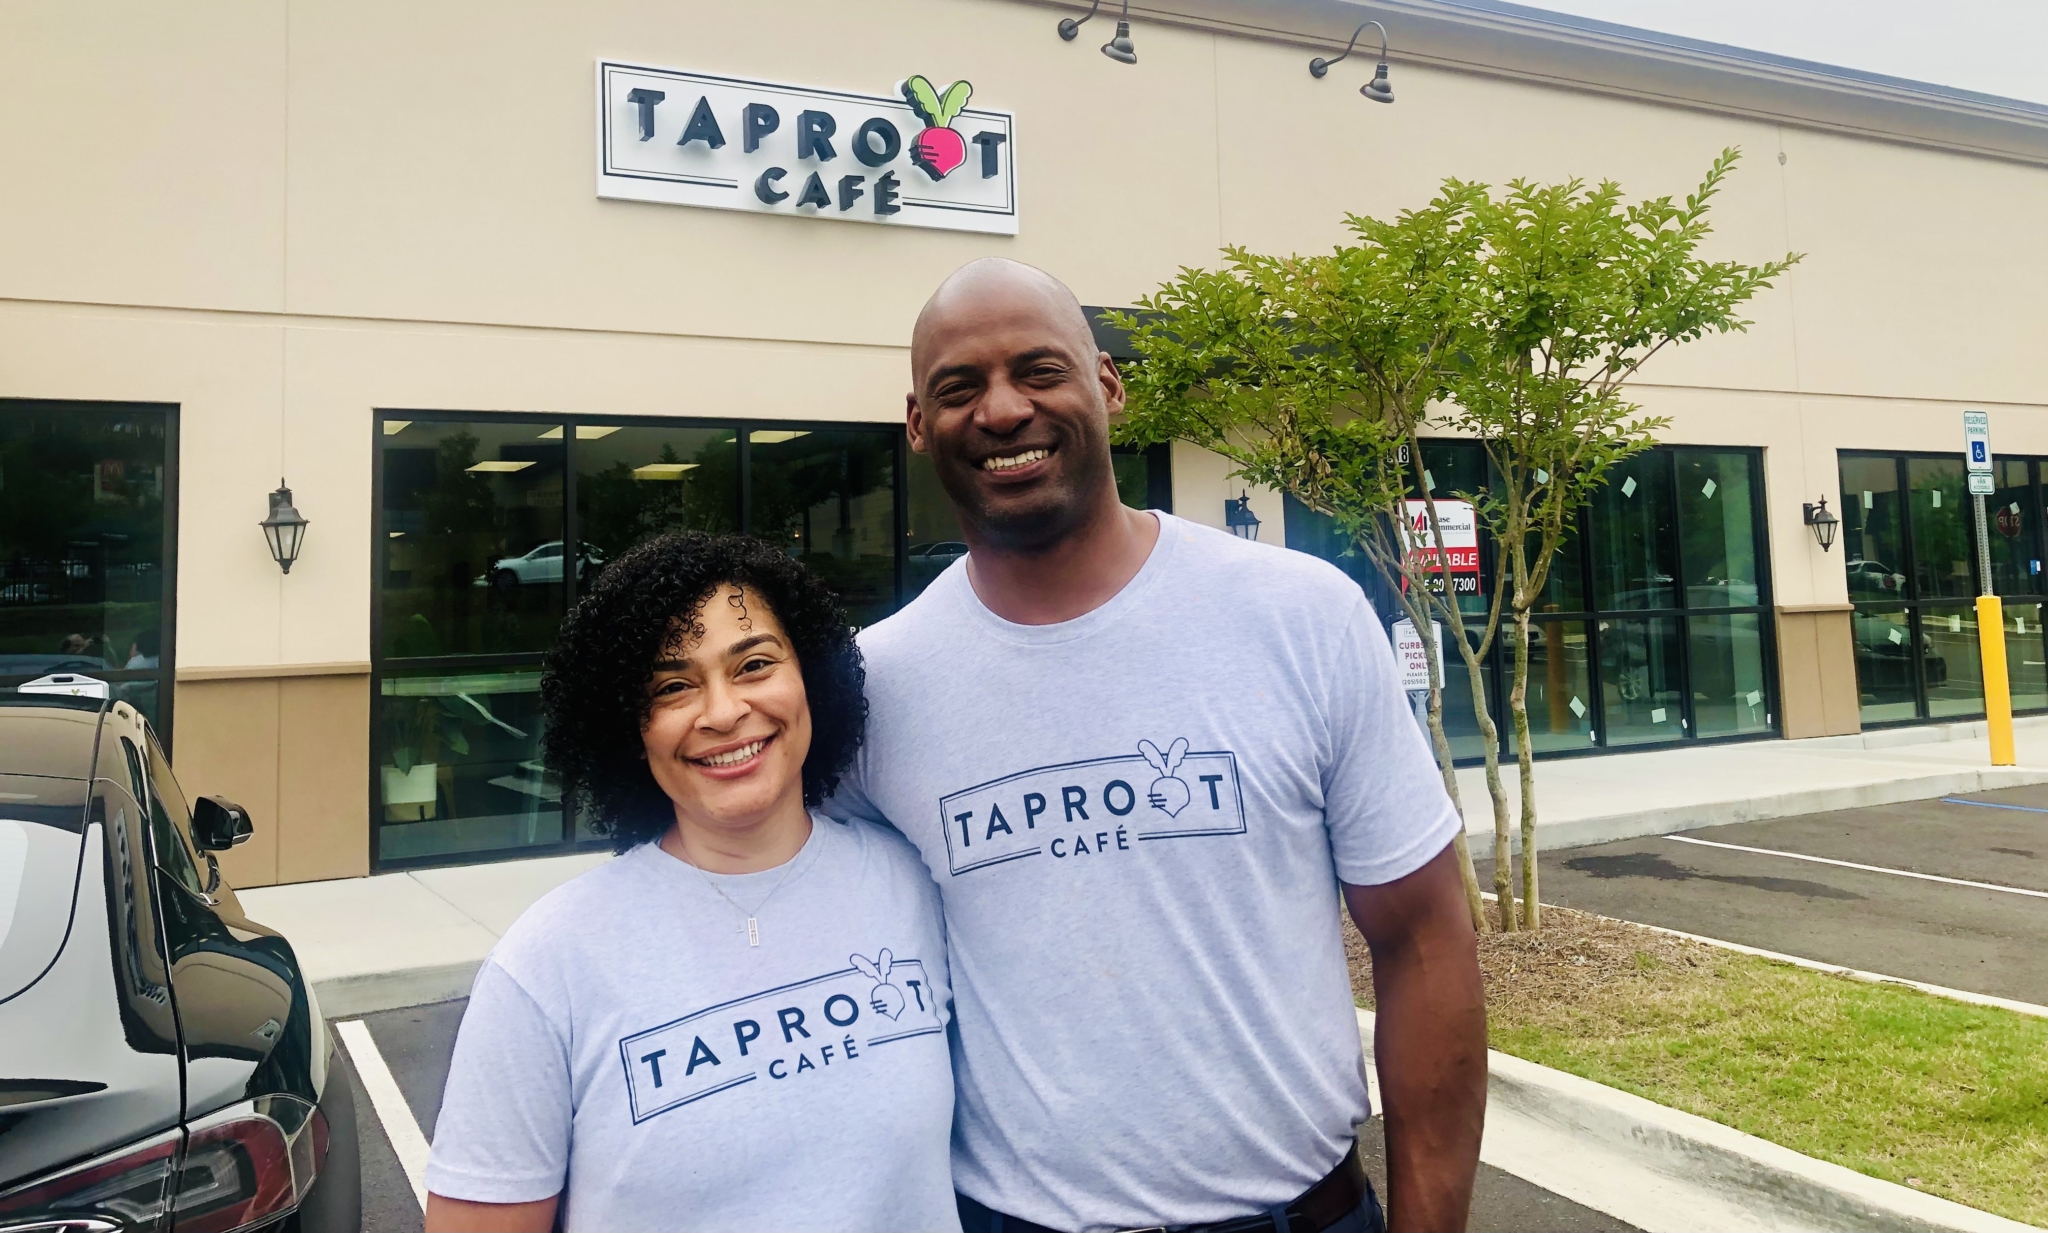 Sneak peek: Taproot Café offers locally sourced, healthy meals in Hoover